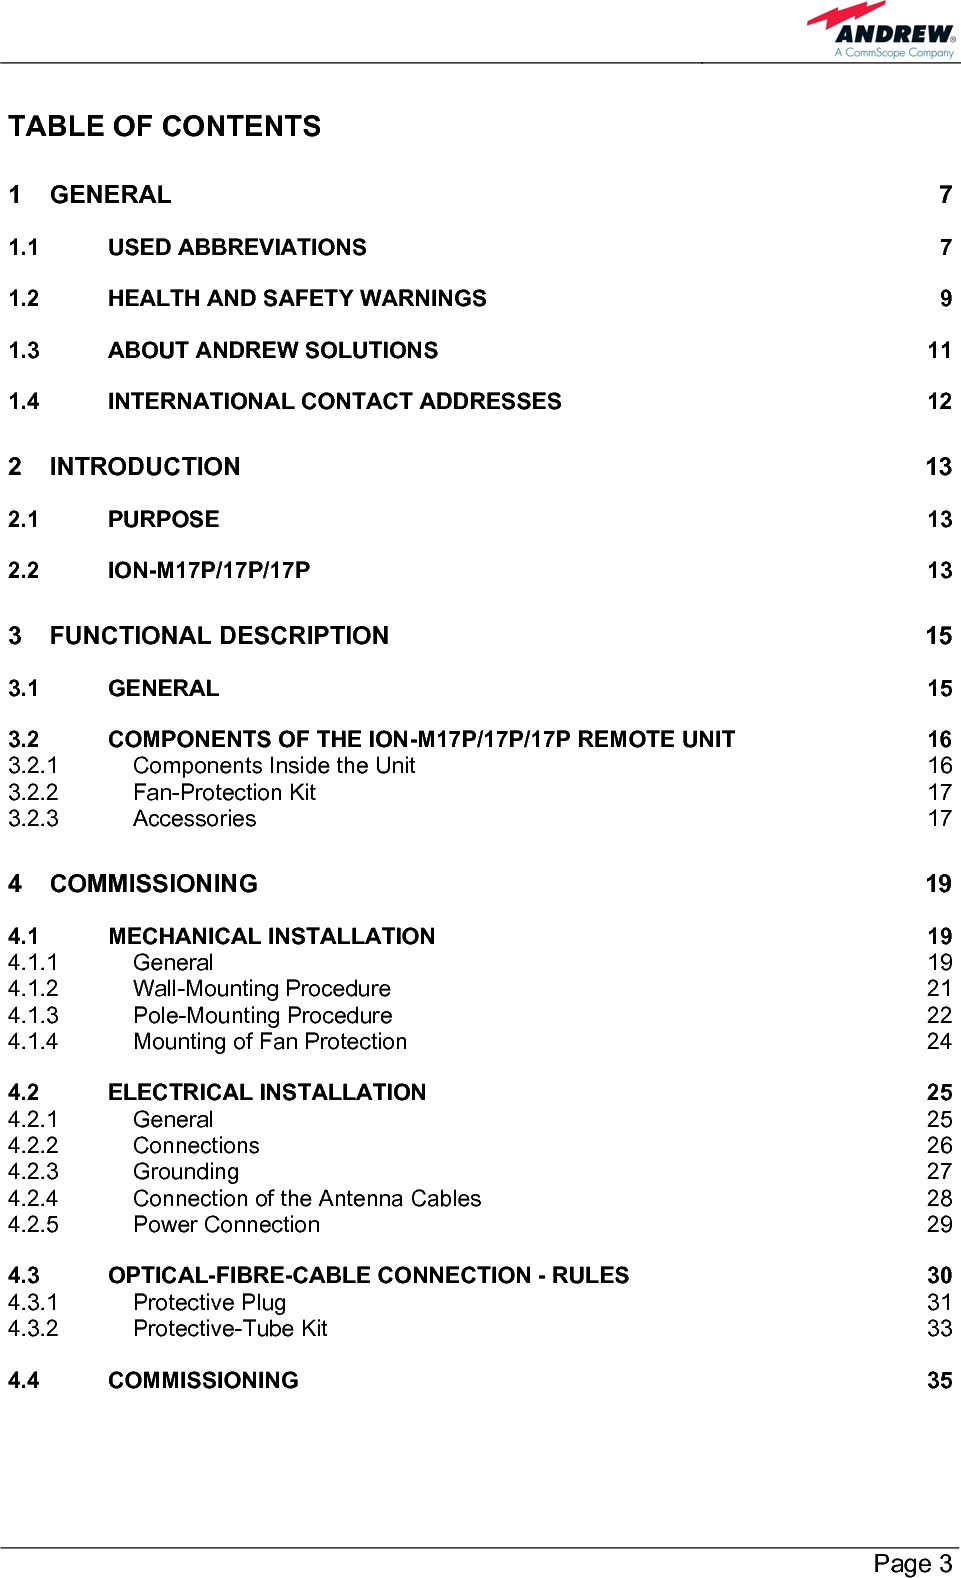        Page 3 TABLE OF CONTENTS 1 GENERAL 7 1.1 USED ABBREVIATIONS  7 1.2 HEALTH AND SAFETY WARNINGS  9 1.3 ABOUT ANDREW SOLUTIONS  11 1.4 INTERNATIONAL CONTACT ADDRESSES  12 2 INTRODUCTION 13 2.1 PURPOSE 13 2.2 ION-M17P/17P/17P 13 3 FUNCTIONAL DESCRIPTION  15 3.1 GENERAL 15 3.2 COMPONENTS OF THE ION-M17P/17P/17P REMOTE UNIT  16 3.2.1 Components Inside the Unit  16 3.2.2 Fan-Protection Kit  17 3.2.3 Accessories 17 4 COMMISSIONING 19 4.1 MECHANICAL INSTALLATION  19 4.1.1 General 19 4.1.2 Wall-Mounting Procedure  21 4.1.3 Pole-Mounting Procedure  22 4.1.4 Mounting of Fan Protection  24 4.2 ELECTRICAL INSTALLATION  25 4.2.1 General 25 4.2.2 Connections 26 4.2.3 Grounding 27 4.2.4 Connection of the Antenna Cables  28 4.2.5 Power Connection  29 4.3 OPTICAL-FIBRE-CABLE CONNECTION - RULES  30 4.3.1 Protective Plug  31 4.3.2 Protective-Tube Kit  33 4.4 COMMISSIONING 35 